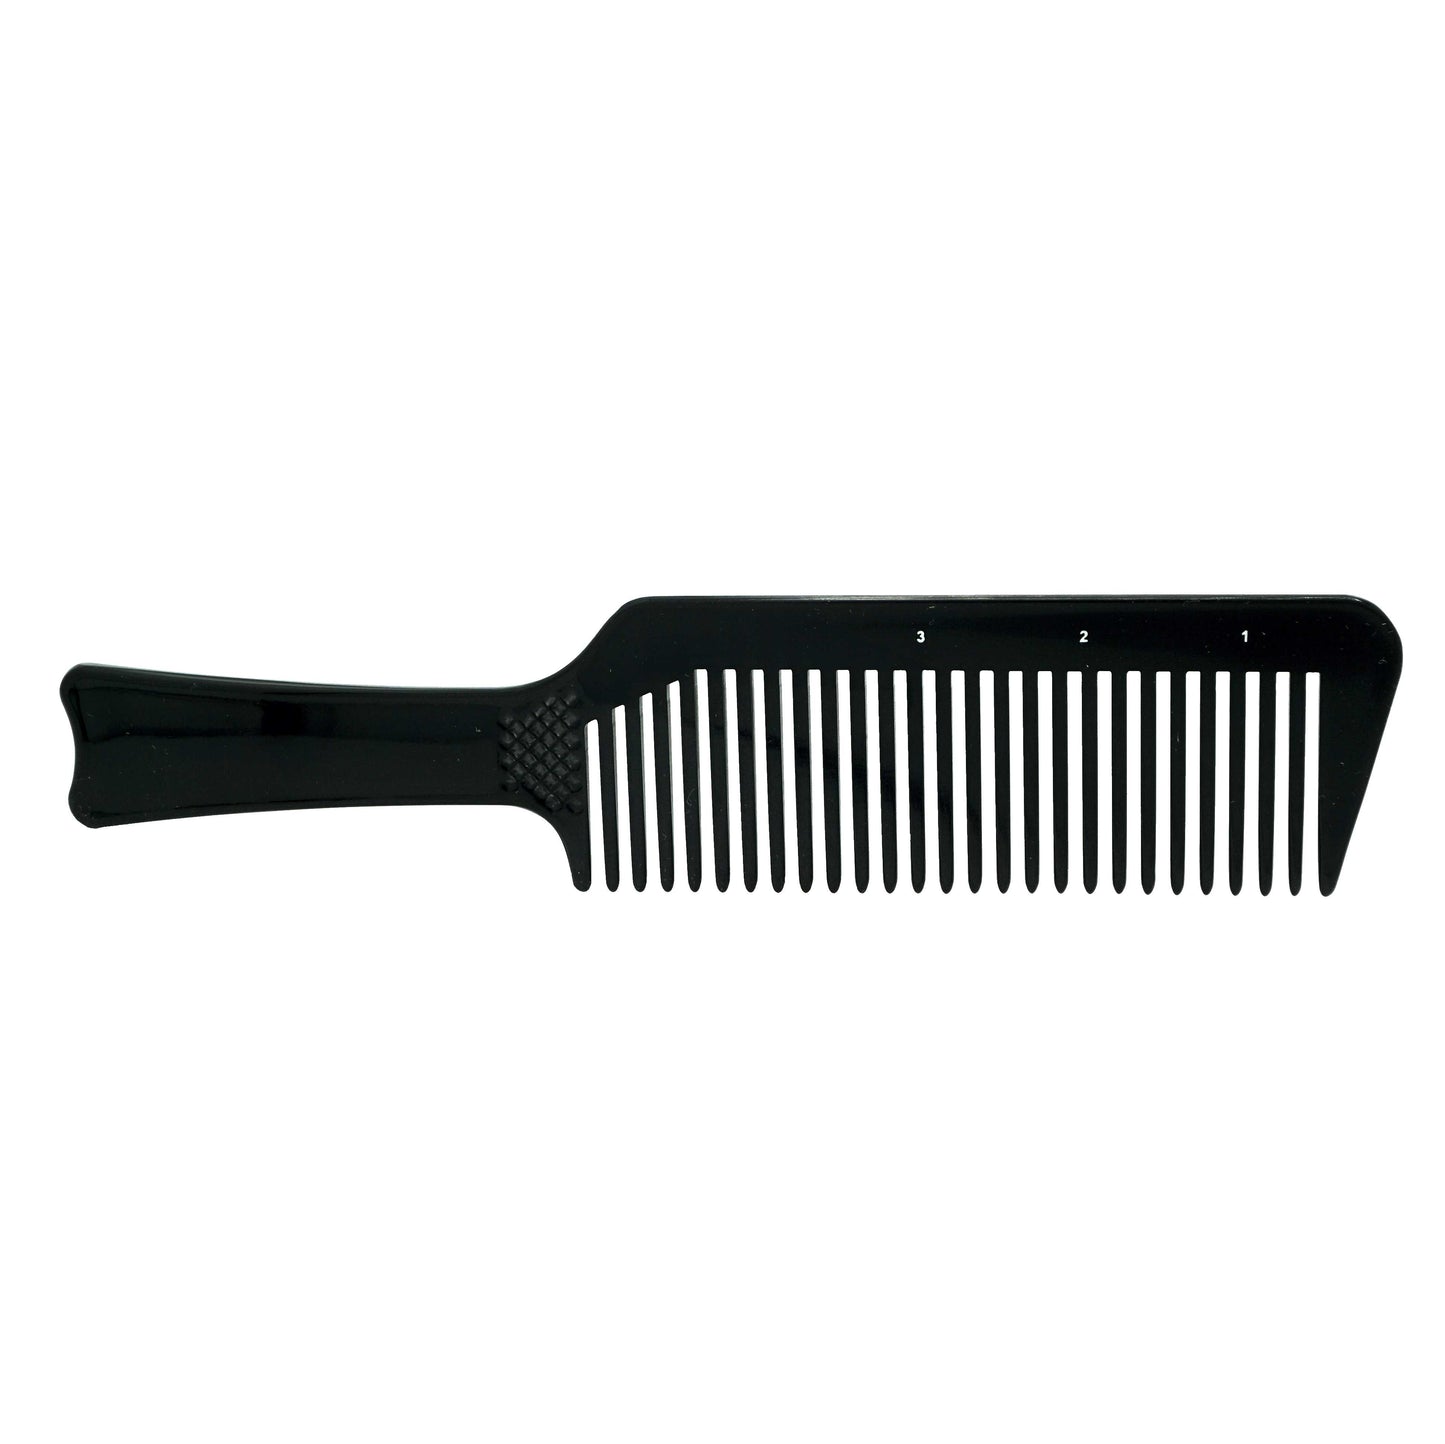 Pegasus 514B, 8.75in Hard Rubber Flattop Butch Comb, Handmade, Seamless, Smooth Edges, Anti Static, Heat and Chemically Resistant Comb | Peines de goma dura - Black